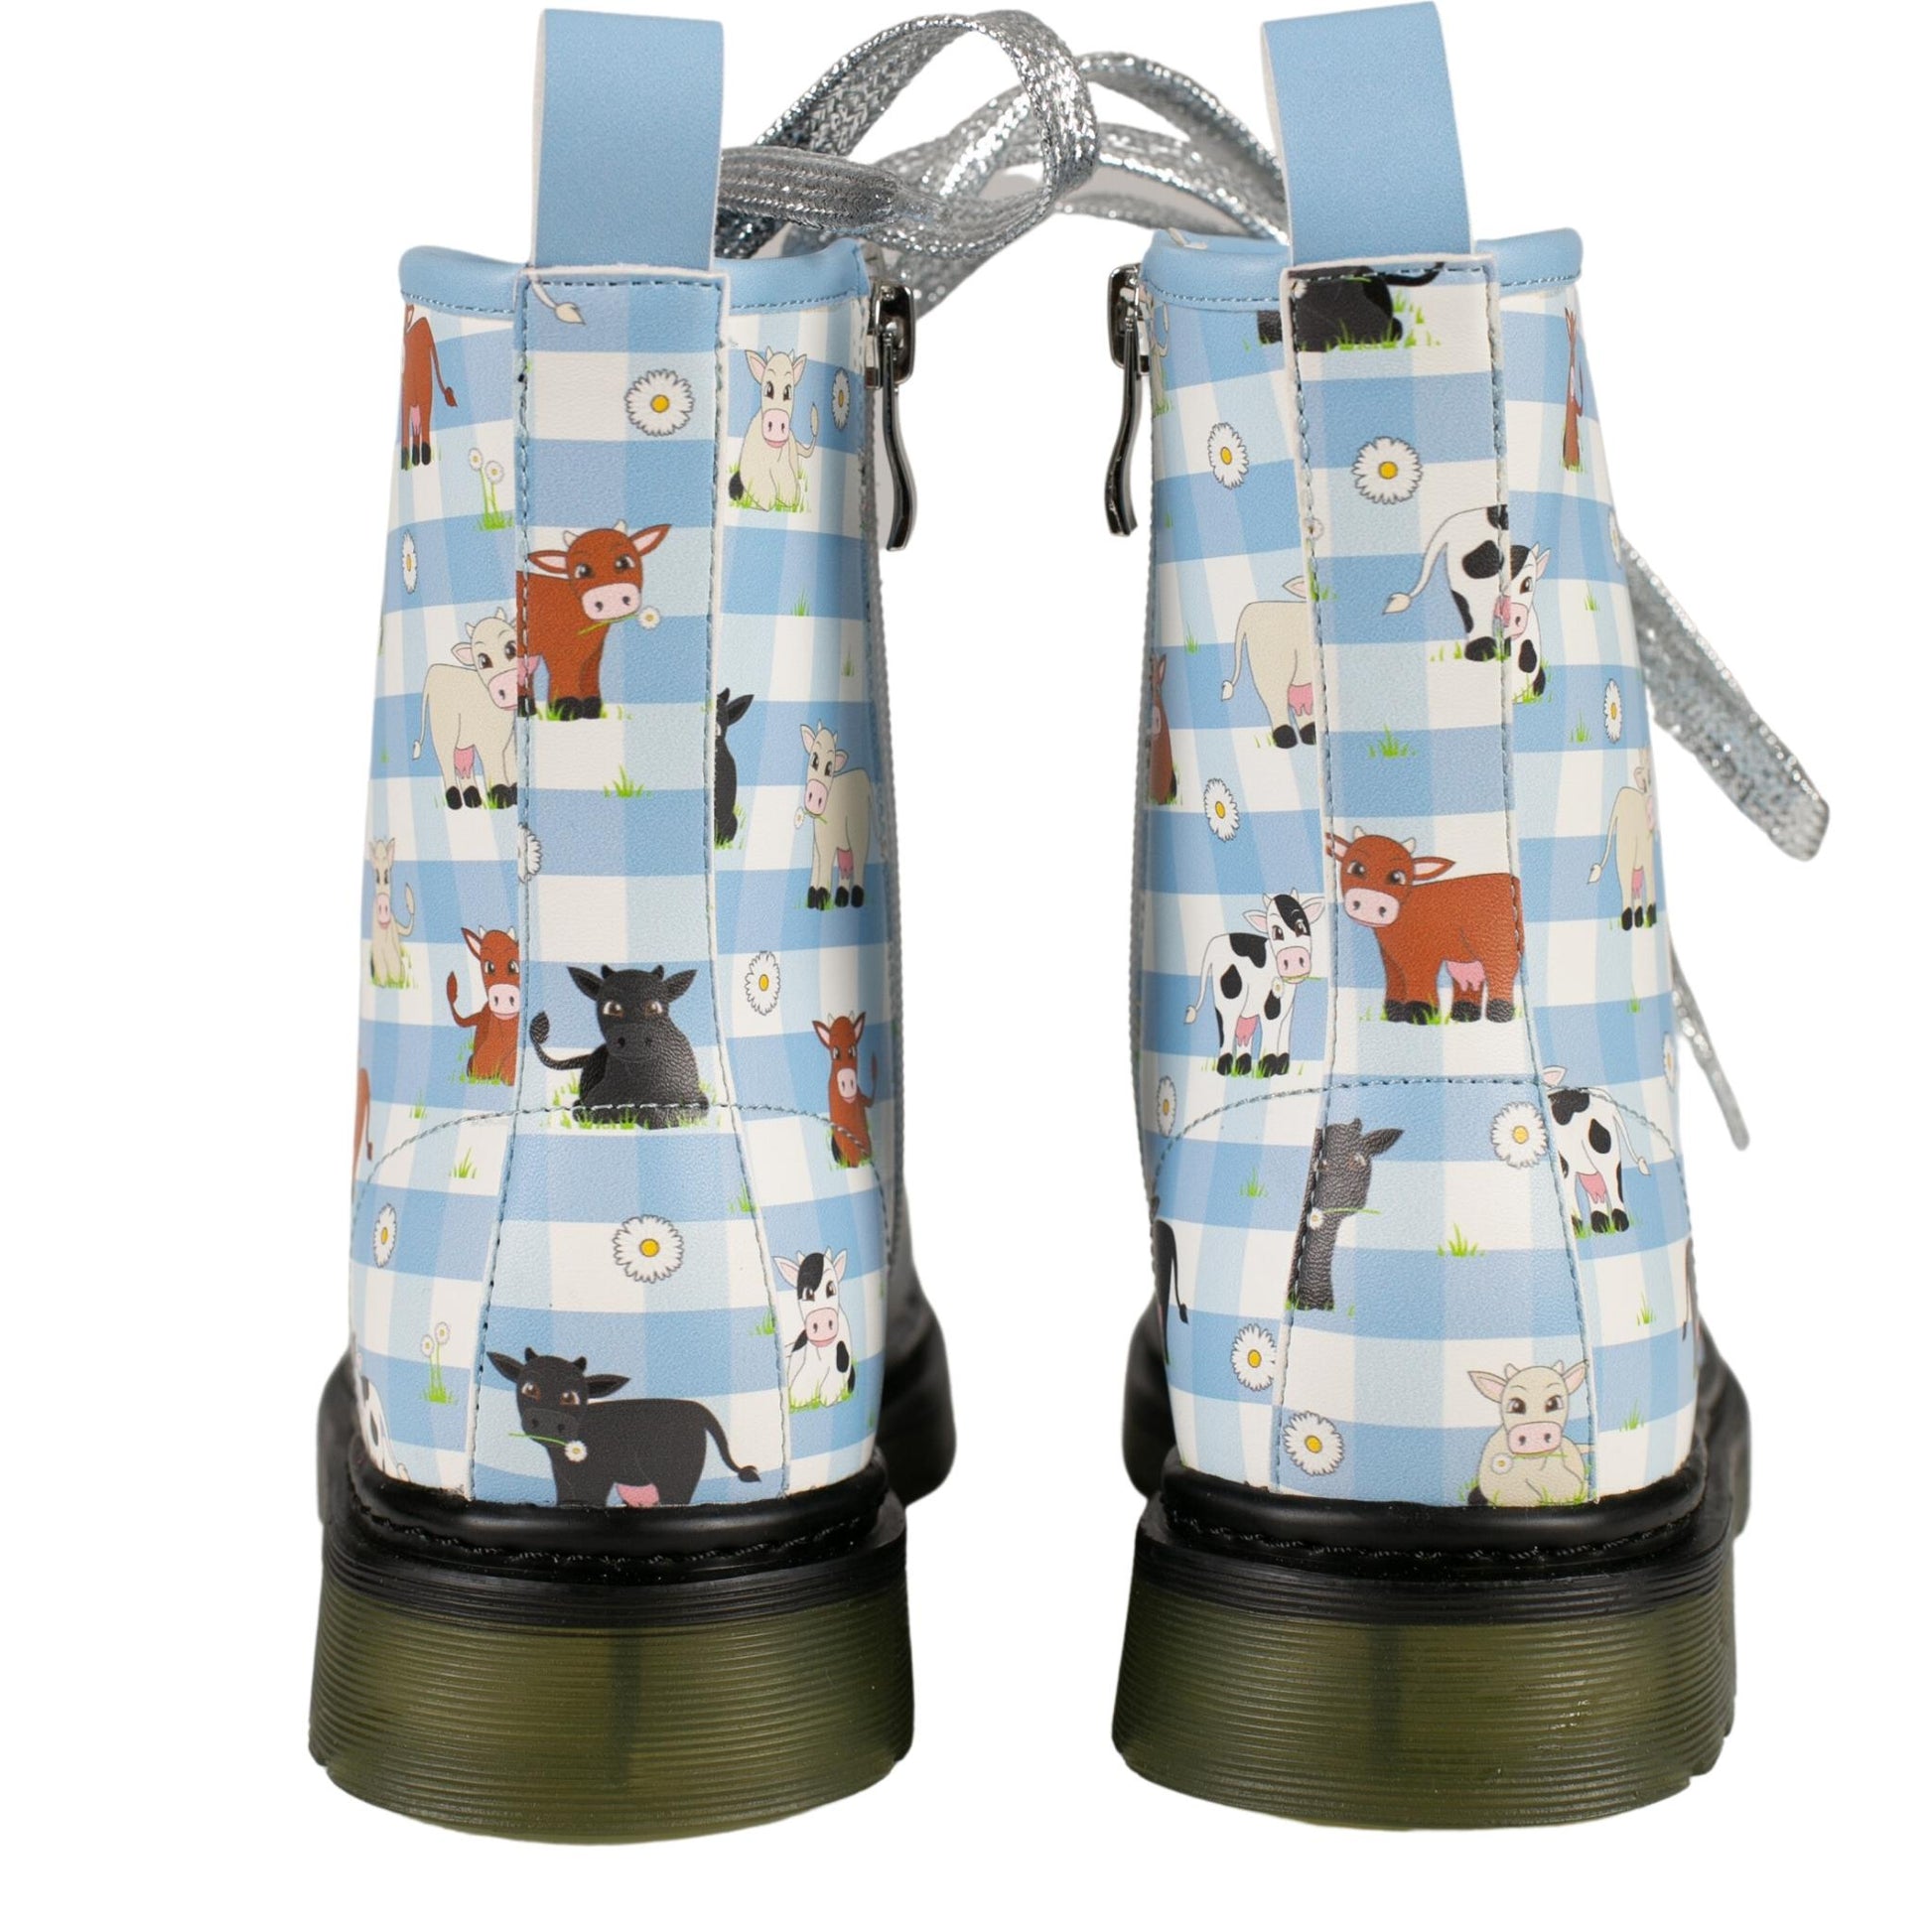 Udderly Quirky Wonder Boots by RainbowsAndFairies.com.au (Cows - Animals - Farm- Combat Boots - Side Zip Boots - Mismatched Shoes) - SKU: FW_WONDR_UDDER_ORG - Pic-09